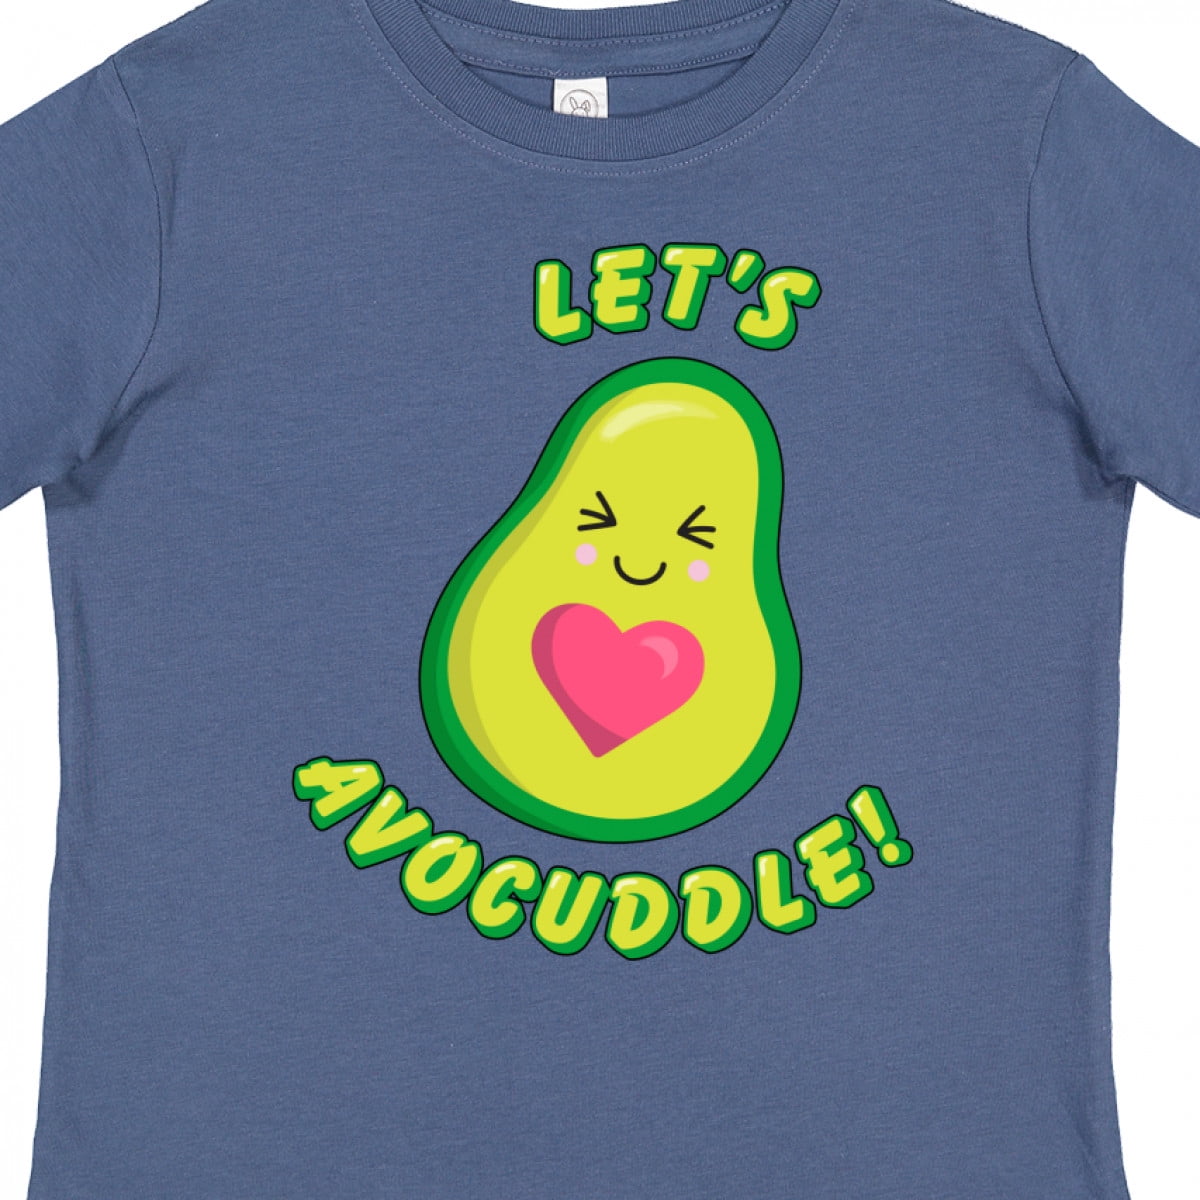 I want to Avocuddle with you Girls Boys Kids Childrens T-Shirt